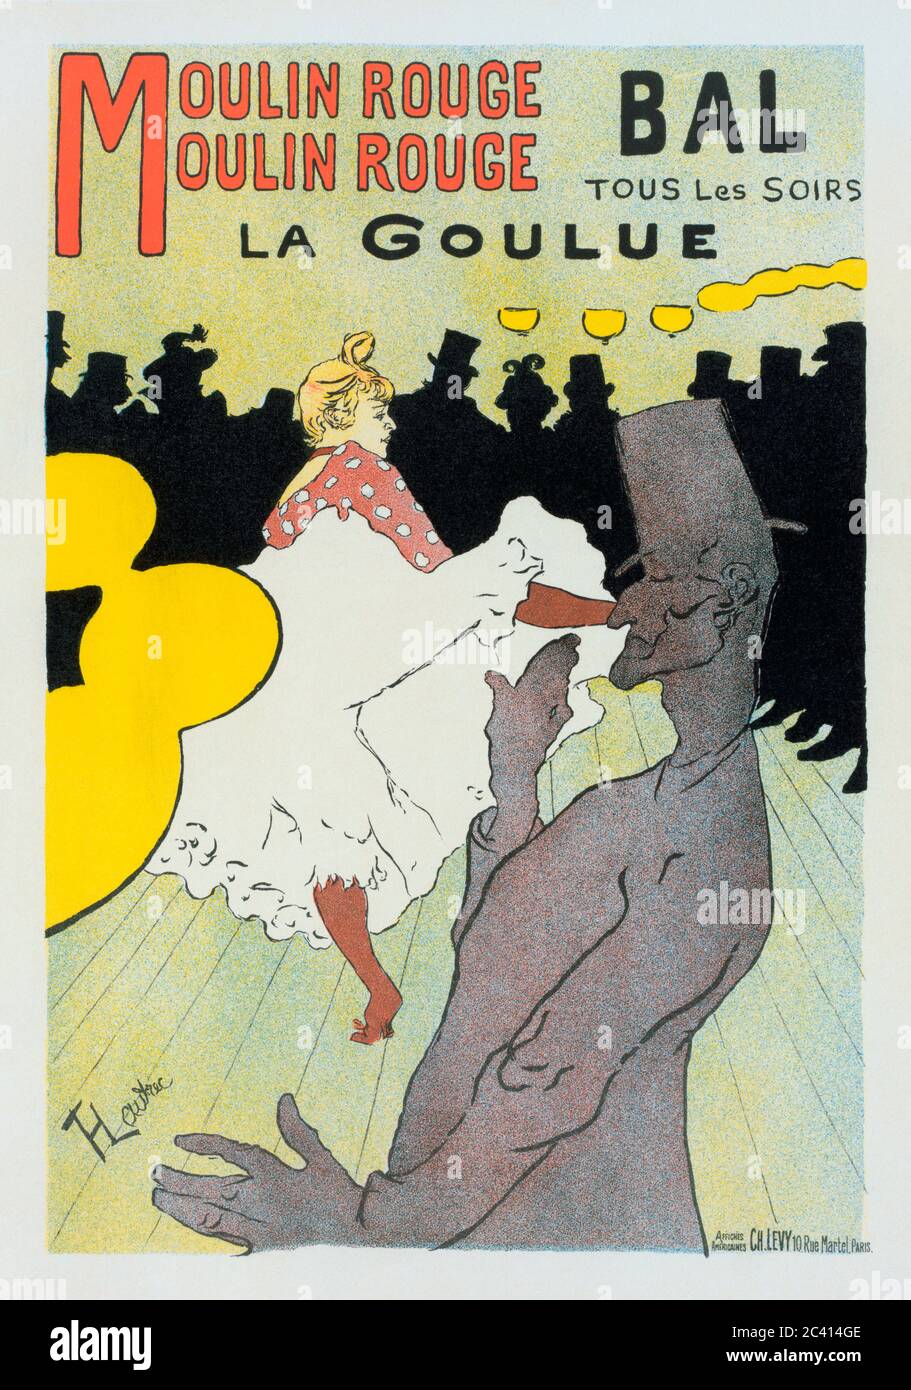 La Goulue and Valentin la Desossee dancing at the Moulin Rouge.   1891 poster by Henri de Toulouse-Lautrec.  Henri de Toulouse-Lautrec, French artist, 1864-1901.  La Goulue was the stage name of Moulin Rouge dancer Louise Weber.  Valentin la Desossee was the stage name of Jaques Renaudin who it is thought held down a full-time day job but danced at the Moulin Rouge at night. Stock Photo